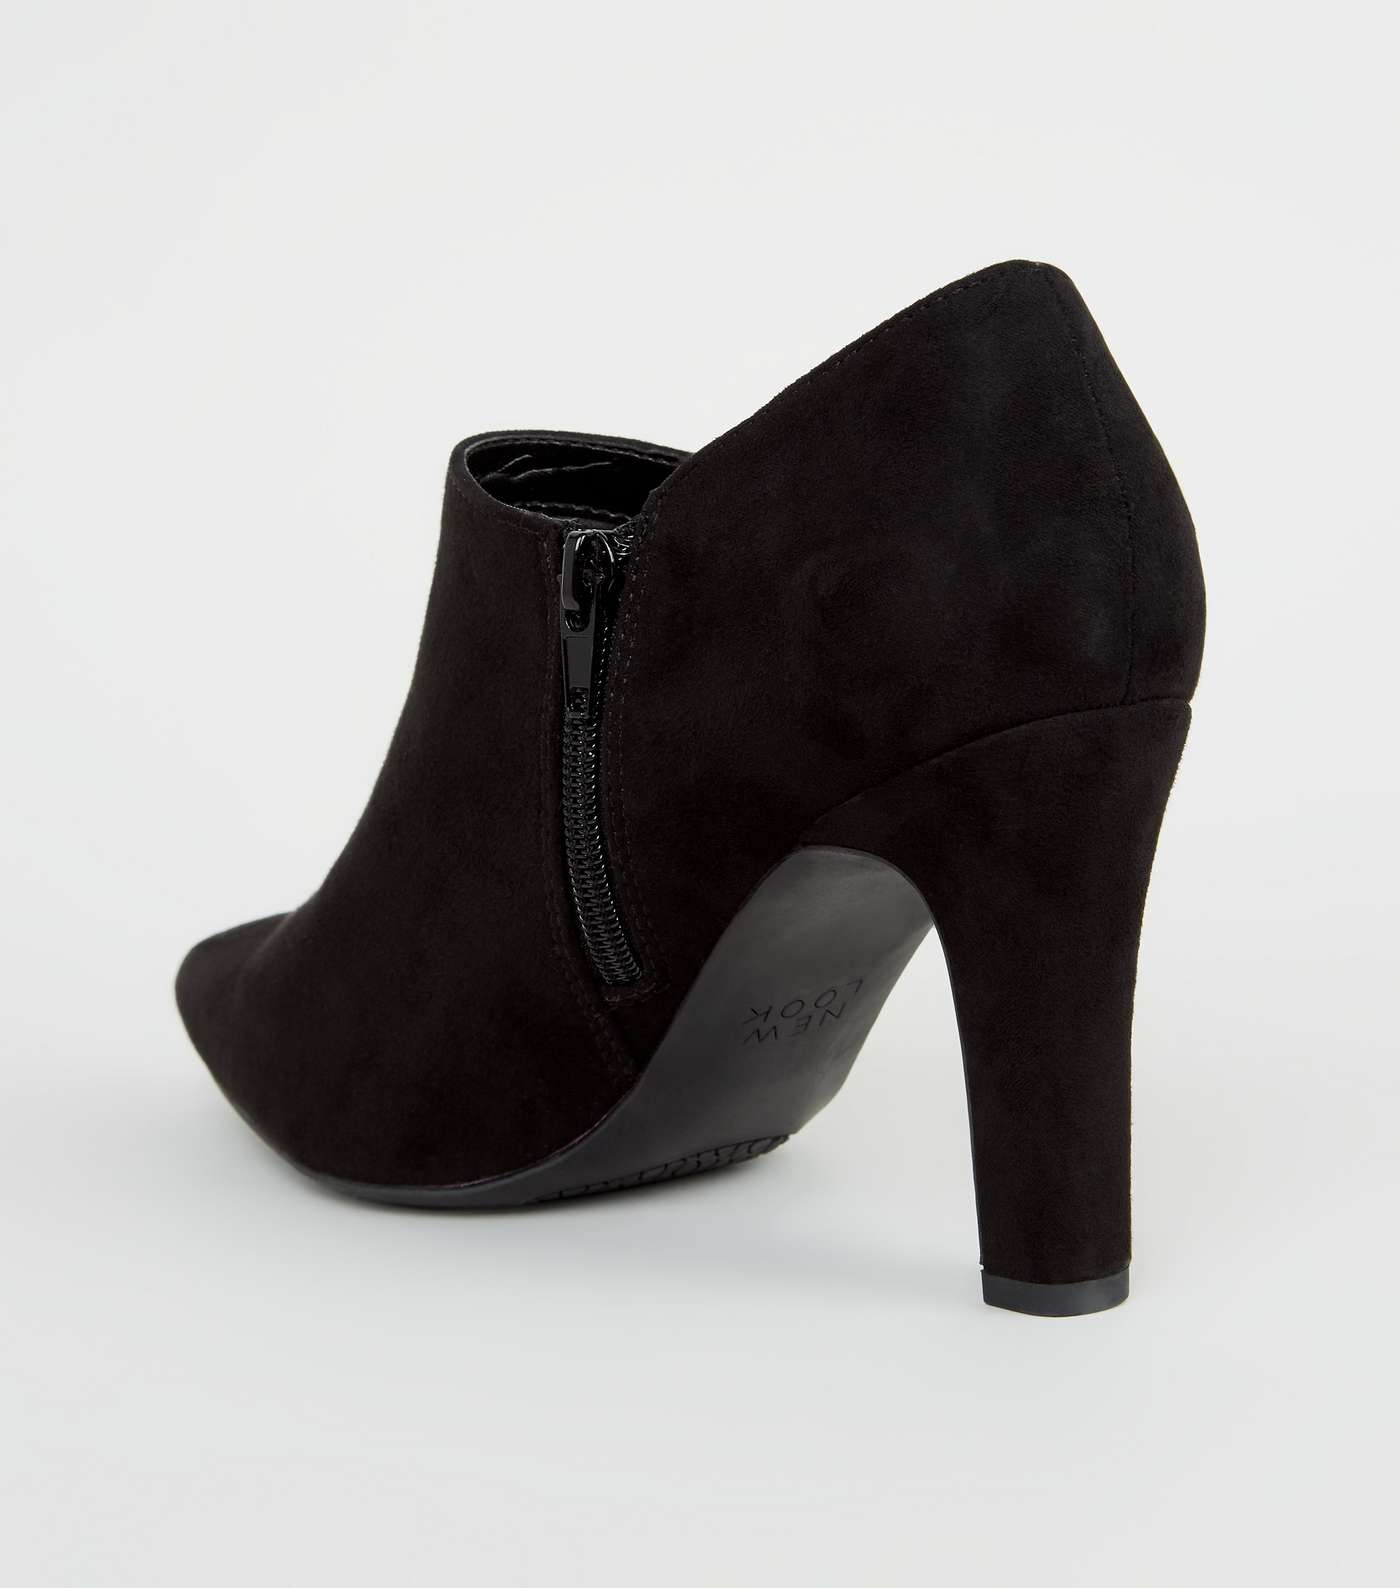 Black Suedette Pointed Toe Heeled Shoe Boots Image 4